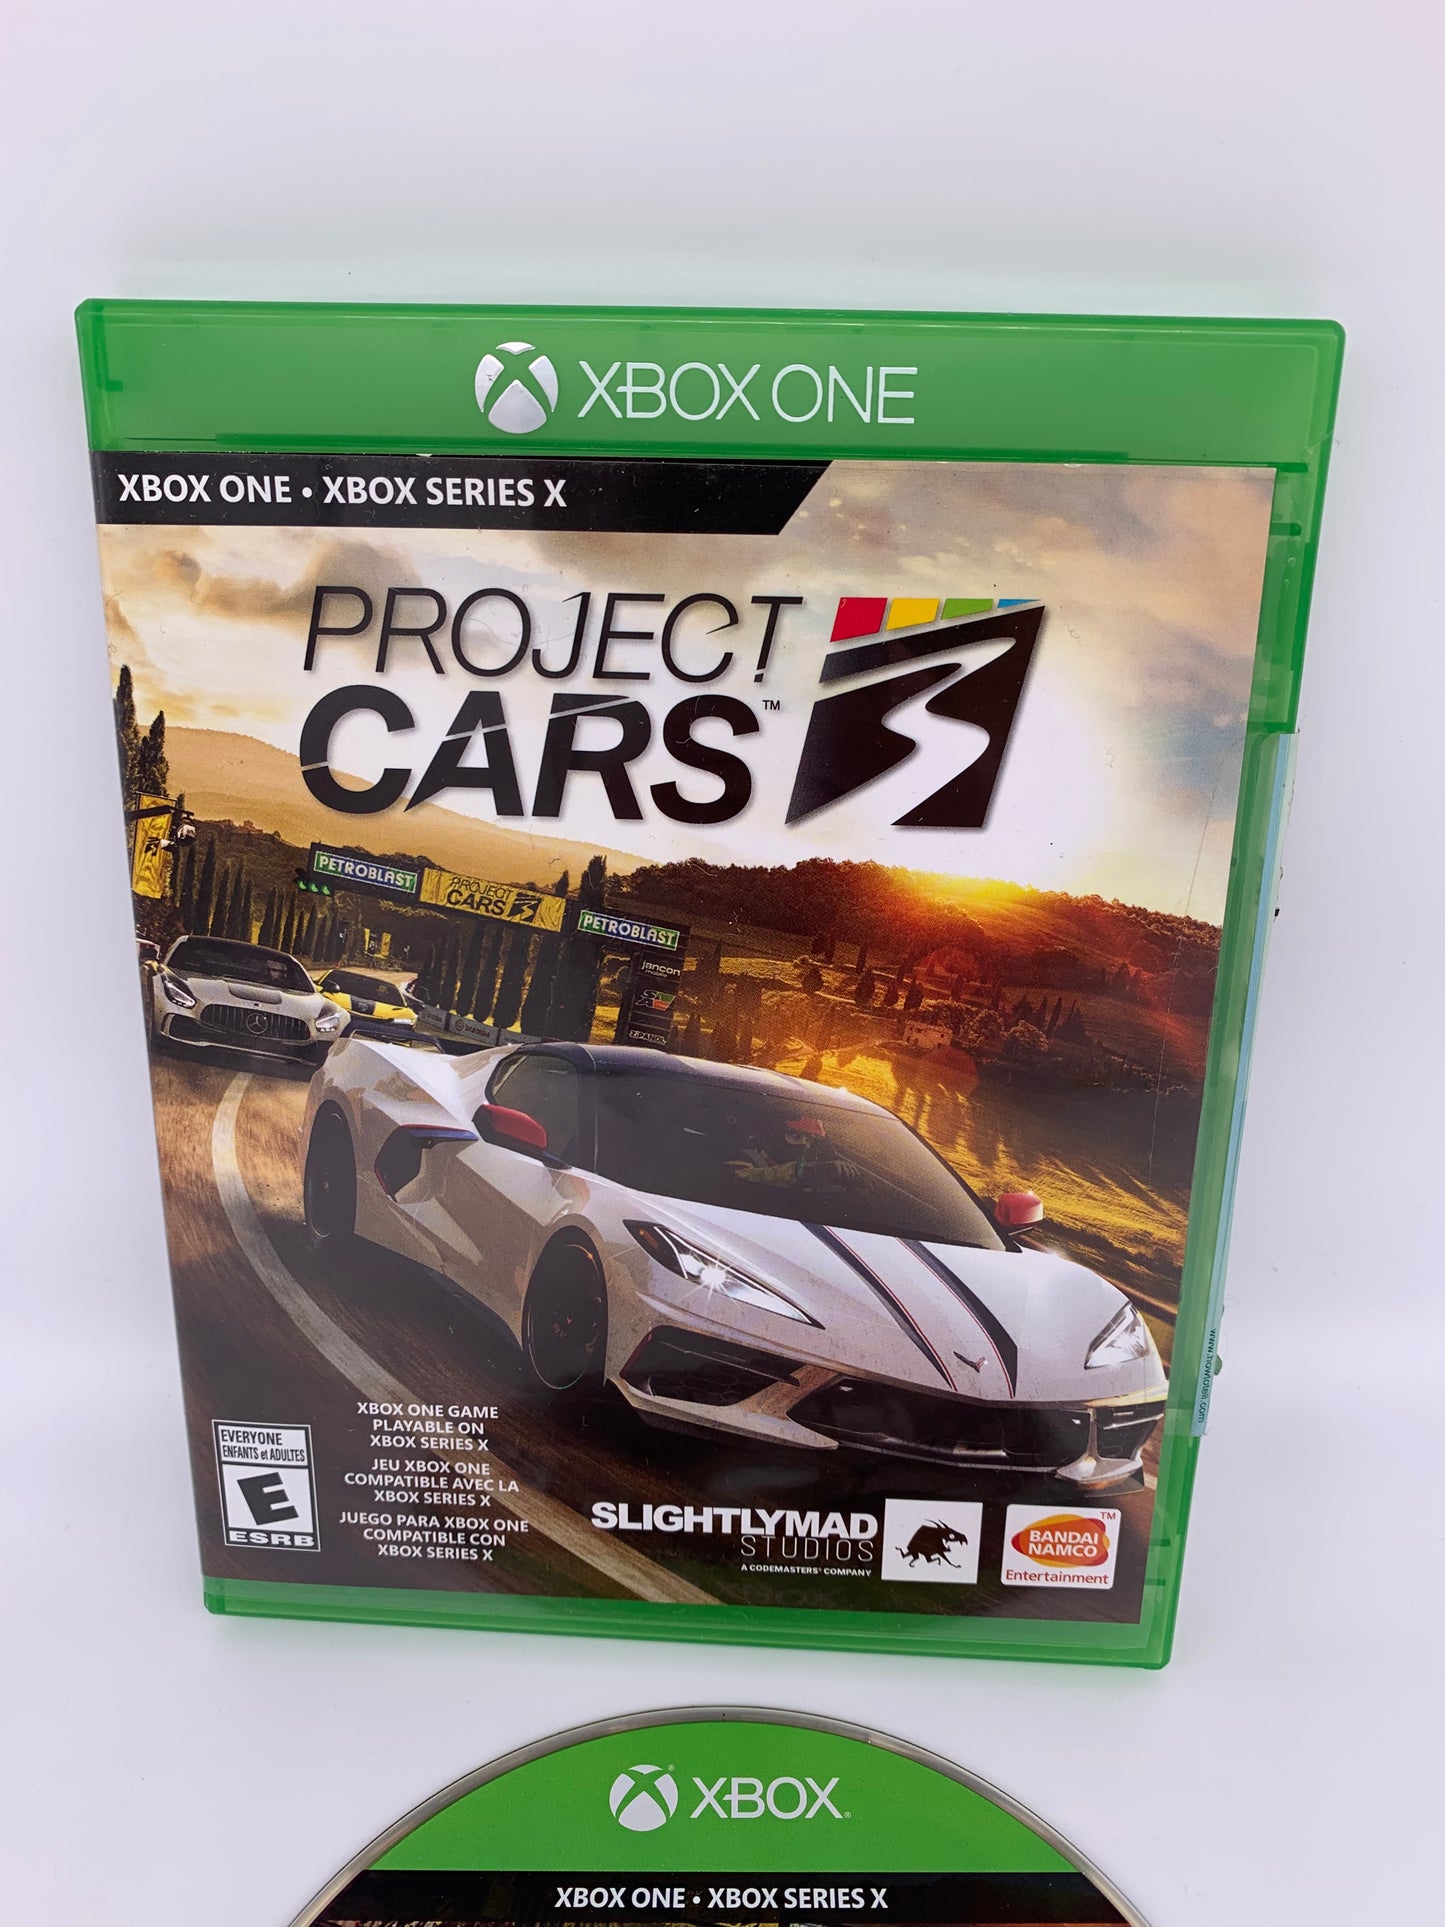 MiCROSOFT XBOX ONE &amp; SERiES PROJECT CARS 3